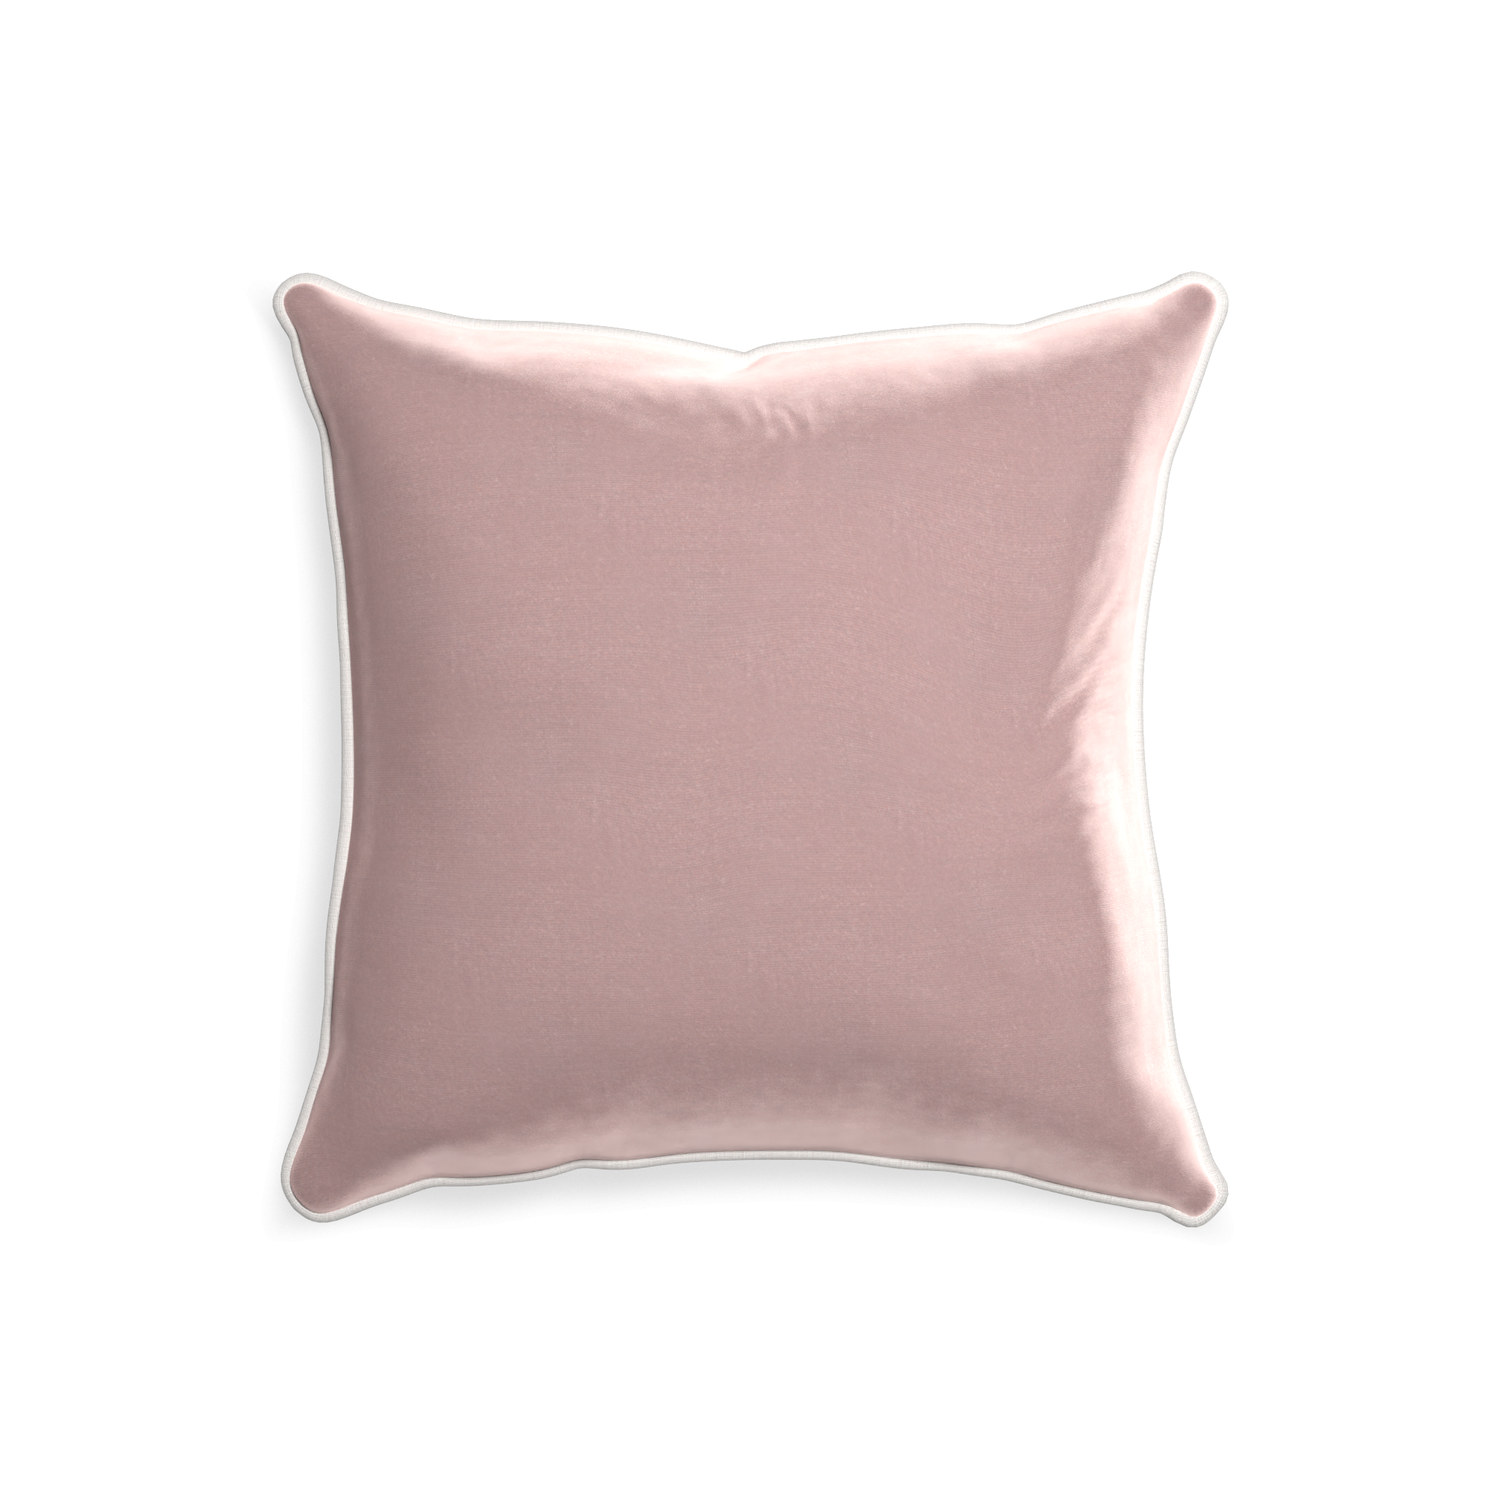 20-square mauve velvet custom pillow with snow piping on white background